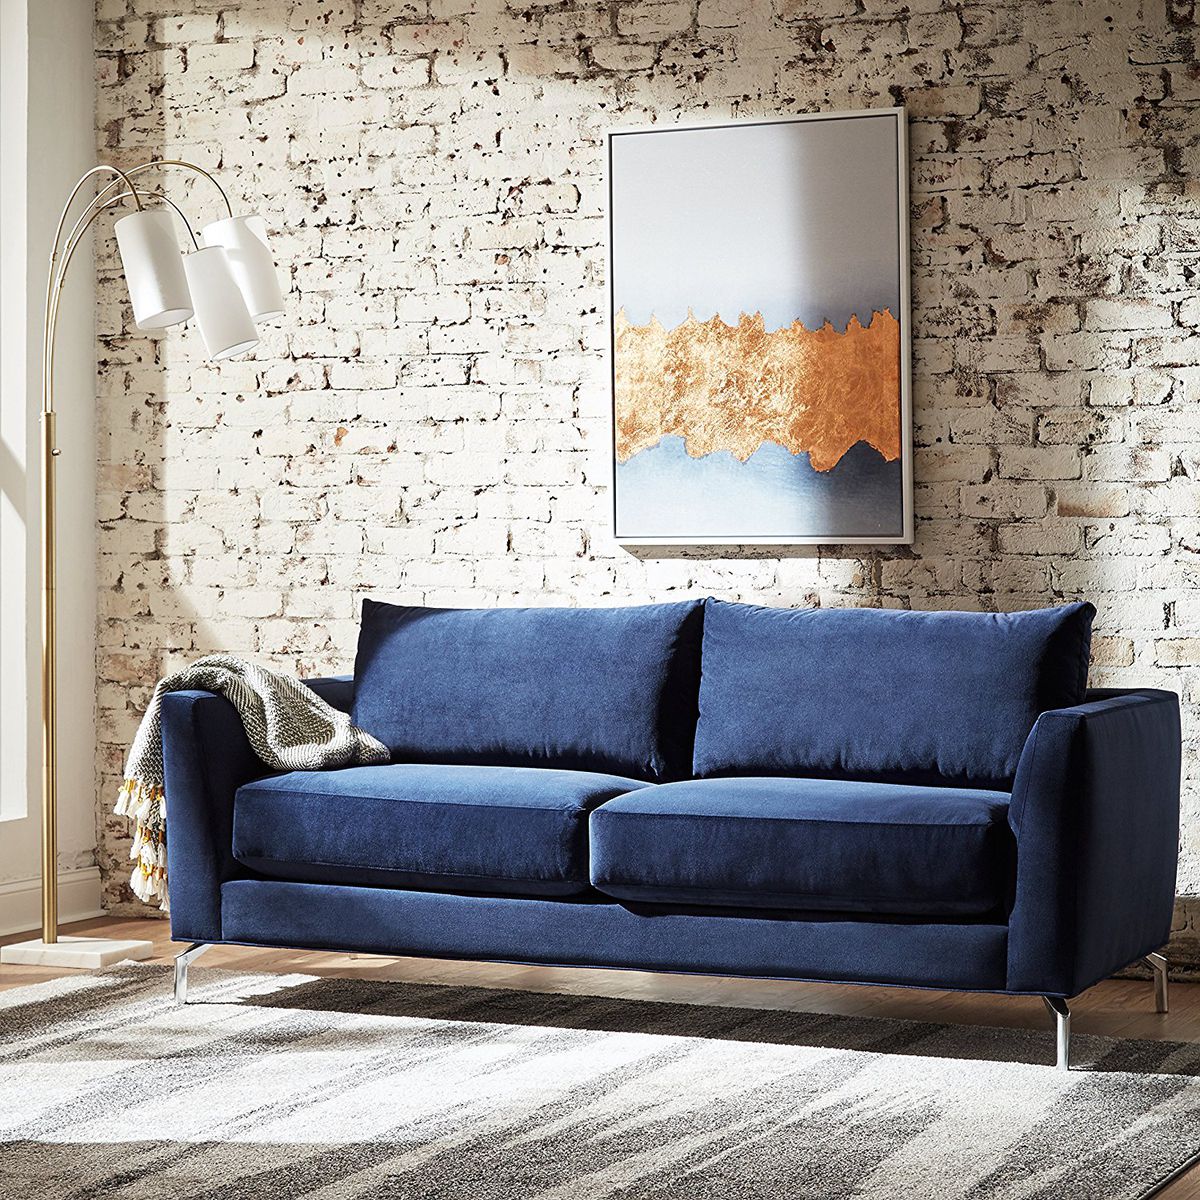 One of Amazon's navy blue "Rivet" couches set up in a living space.